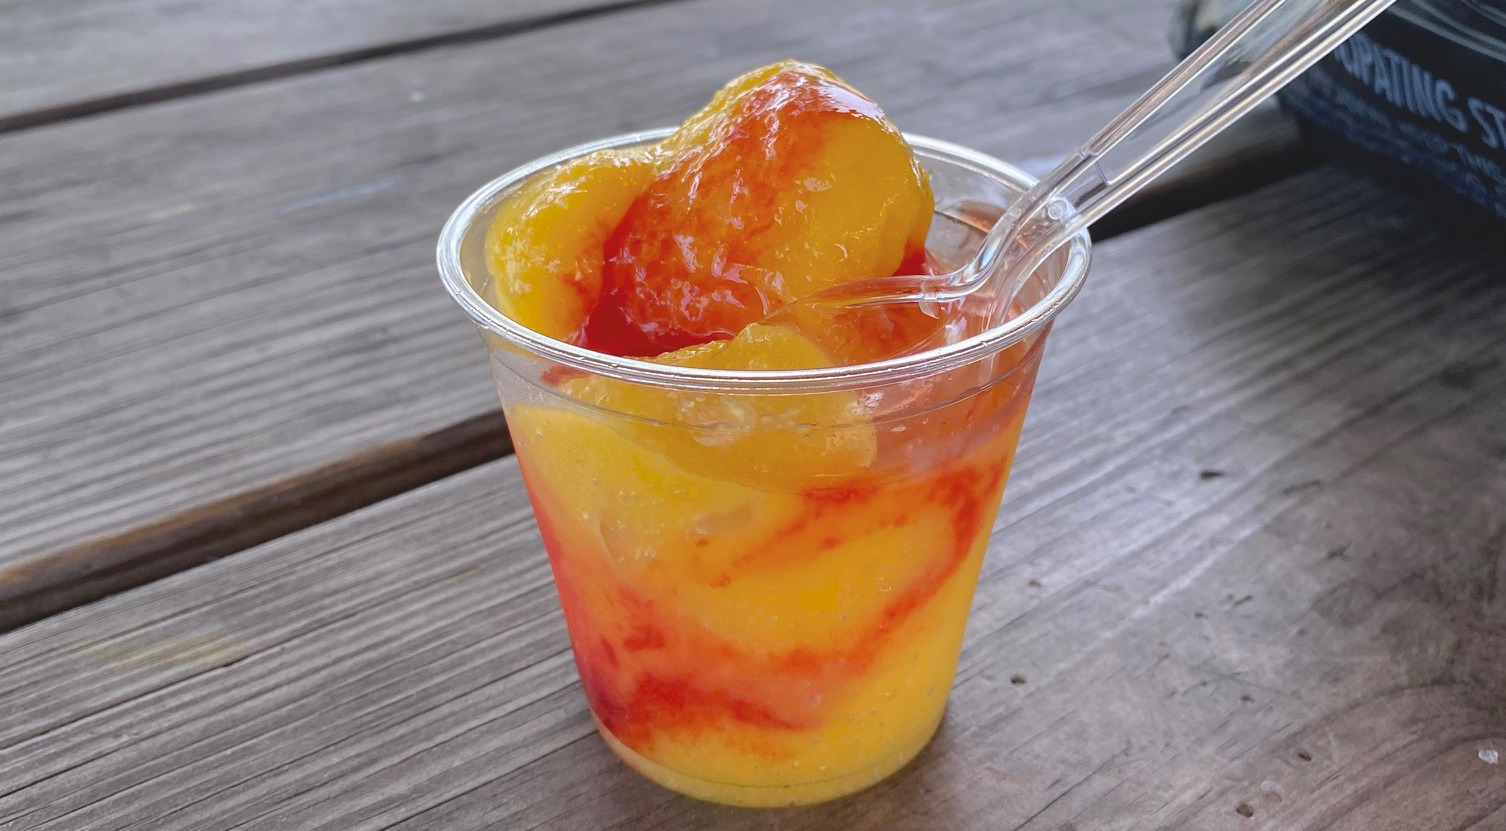 A cup of frozen mango dessert with a plastic spoon, sitting on a wooden picnic table.